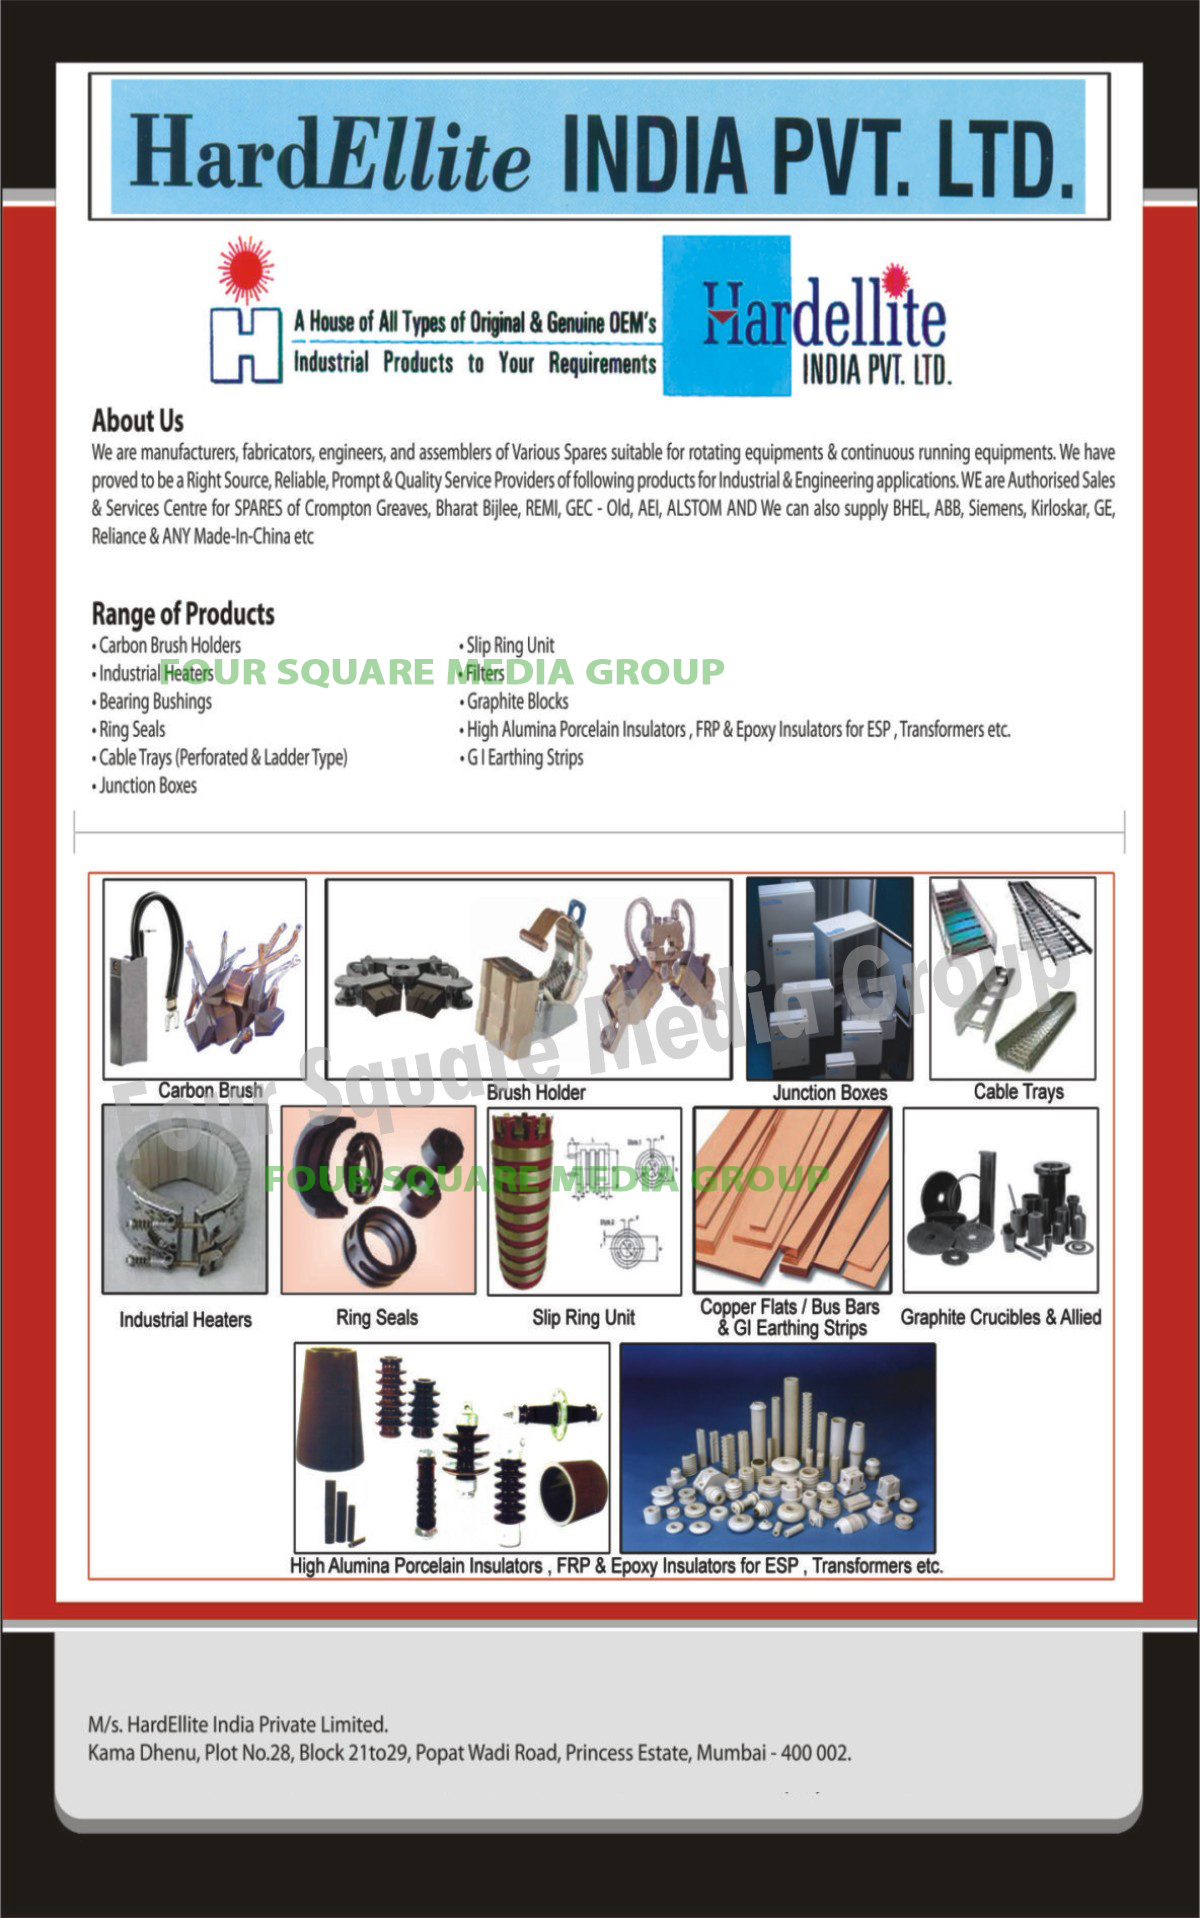 Carbon Brush Holders, Industrial Heaters, Bearing Bushes, Ring Seals, Perforated Type Cable Trays, Ladder Type Cable Trays, Junction Boxes, Slip Ring Units, Filters, Graphite Blocks, High Alumina Porcelain Insulators, FRP Insulator For ESP, Epoxy Insulator For ESP, Transformers, GI Earthing Strips, Copper Flats, Bus Bars, Graphite Crucibles, Graphite Allieds, Cable Trays, Transformer FRP Insulators, Transformer Epoxy Insulators, Rocker Arms, Insulated Rods, Brush Gear Assemblies, ESP Supports, Emitting Rods, Heating Elements, Sheet Metal Boxes, Polycarbonite Boxes, Electric Motors, Impellers, Blowers, FRP Dust Protection Guards, FRP Dust Protection Canopy, LT Cables, HT Cables, Fire Fighting Equipments, LT Capacitors, HT Capacitors, Cable Jointing Kits, Industrial Plugs, Industrial Sockets, Idlers, Rollers, Drums, Buckets, Pulleys, Shafts, Flanges, Pipe Fittings, Flat Bus Bars, Fire Safety Products